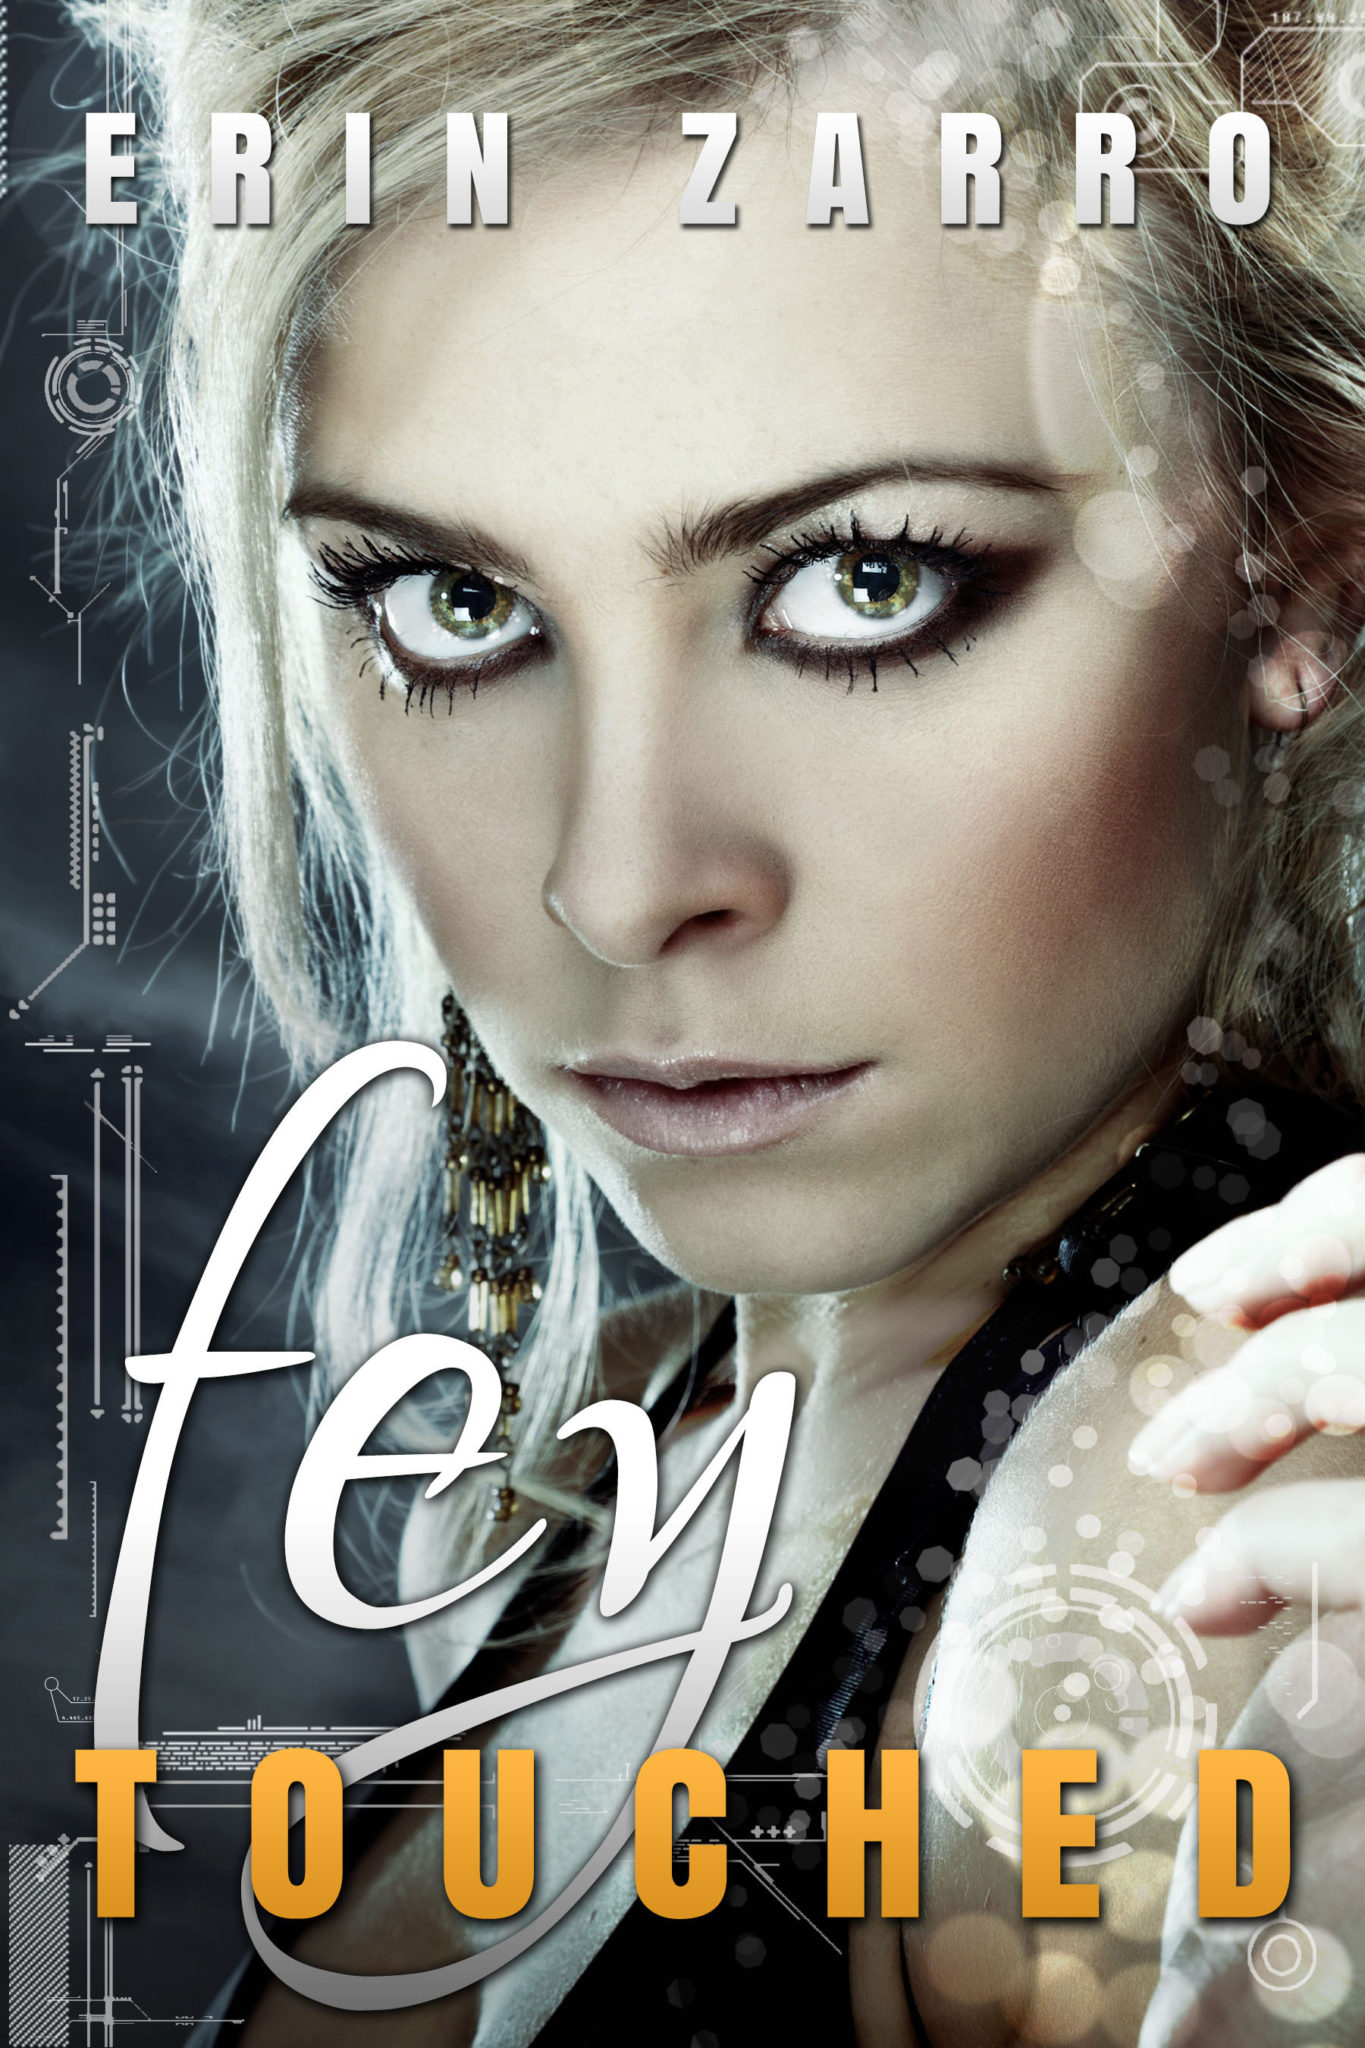 FREE: Fey Touched by Erin Zarro